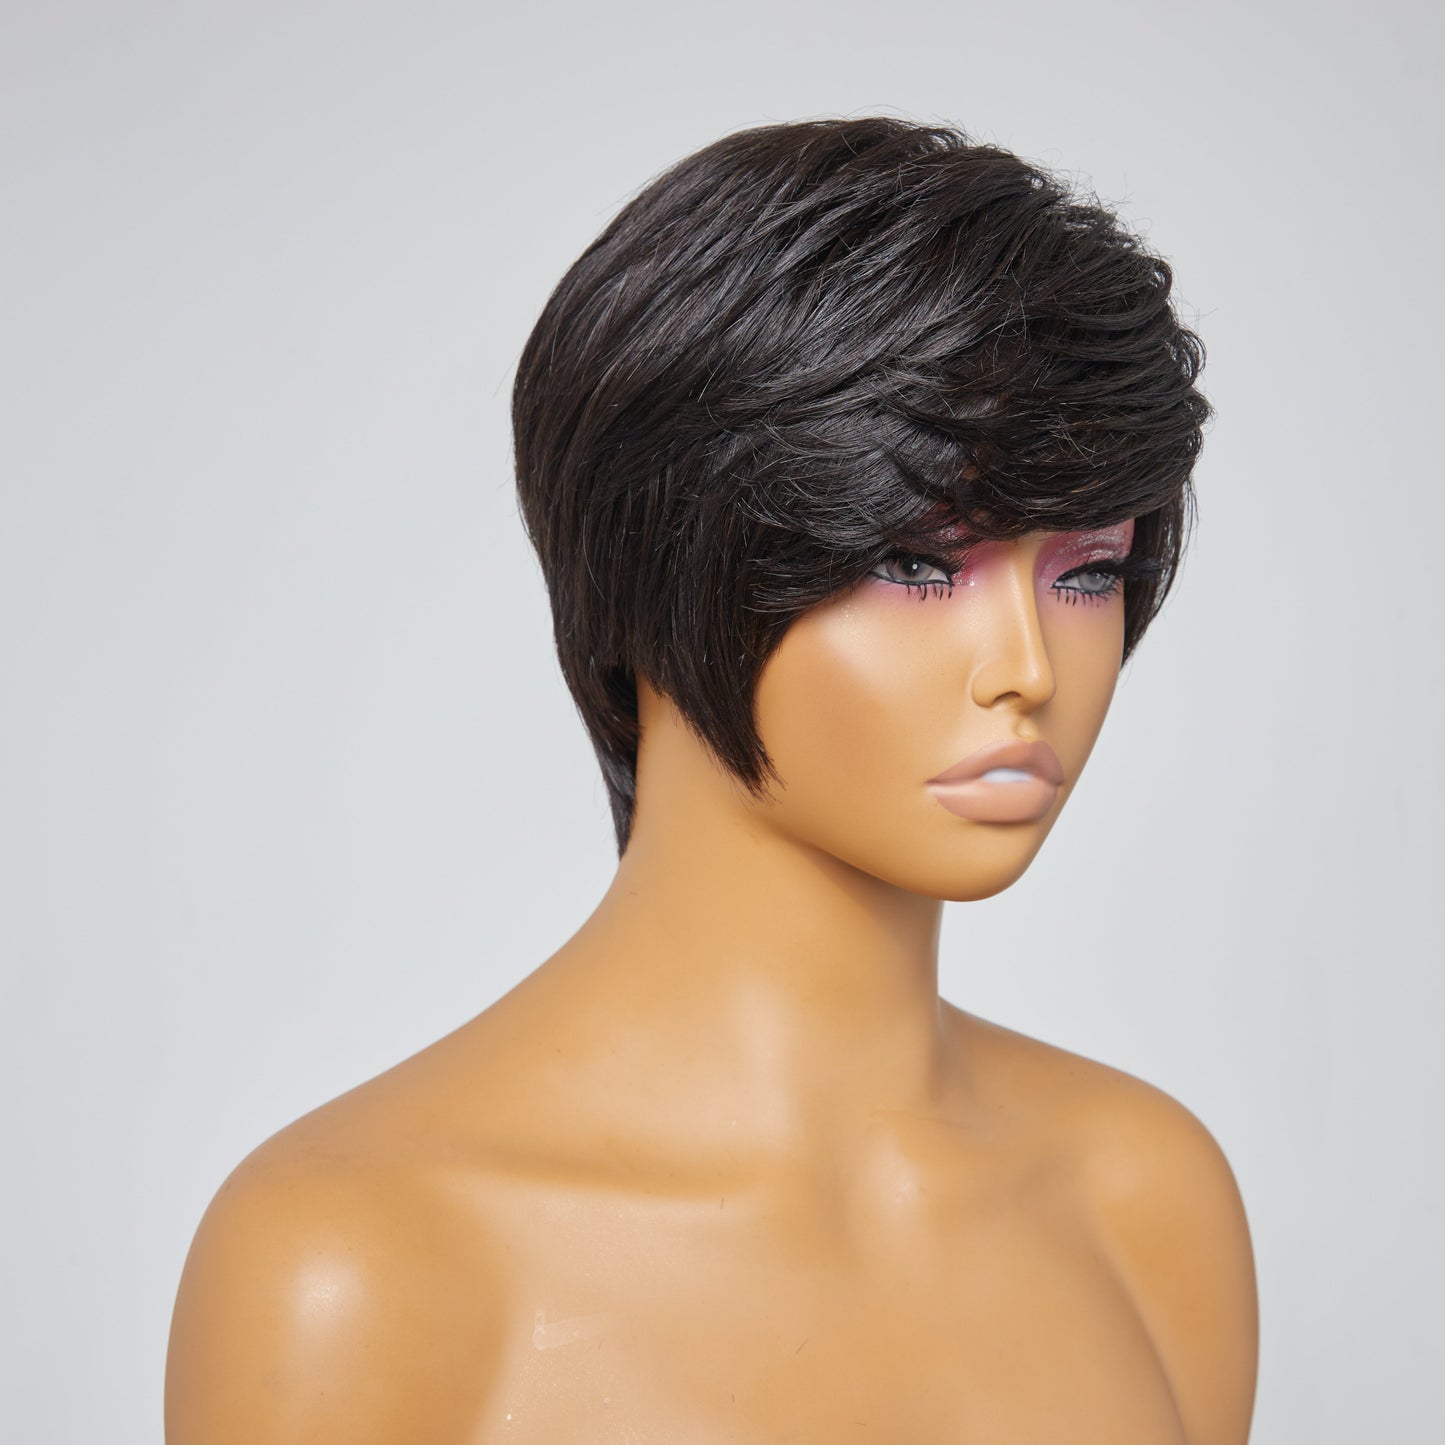 Boss Vibe With Side-swept Bangs No Lace Glueless Short Wig 100% Human Hair